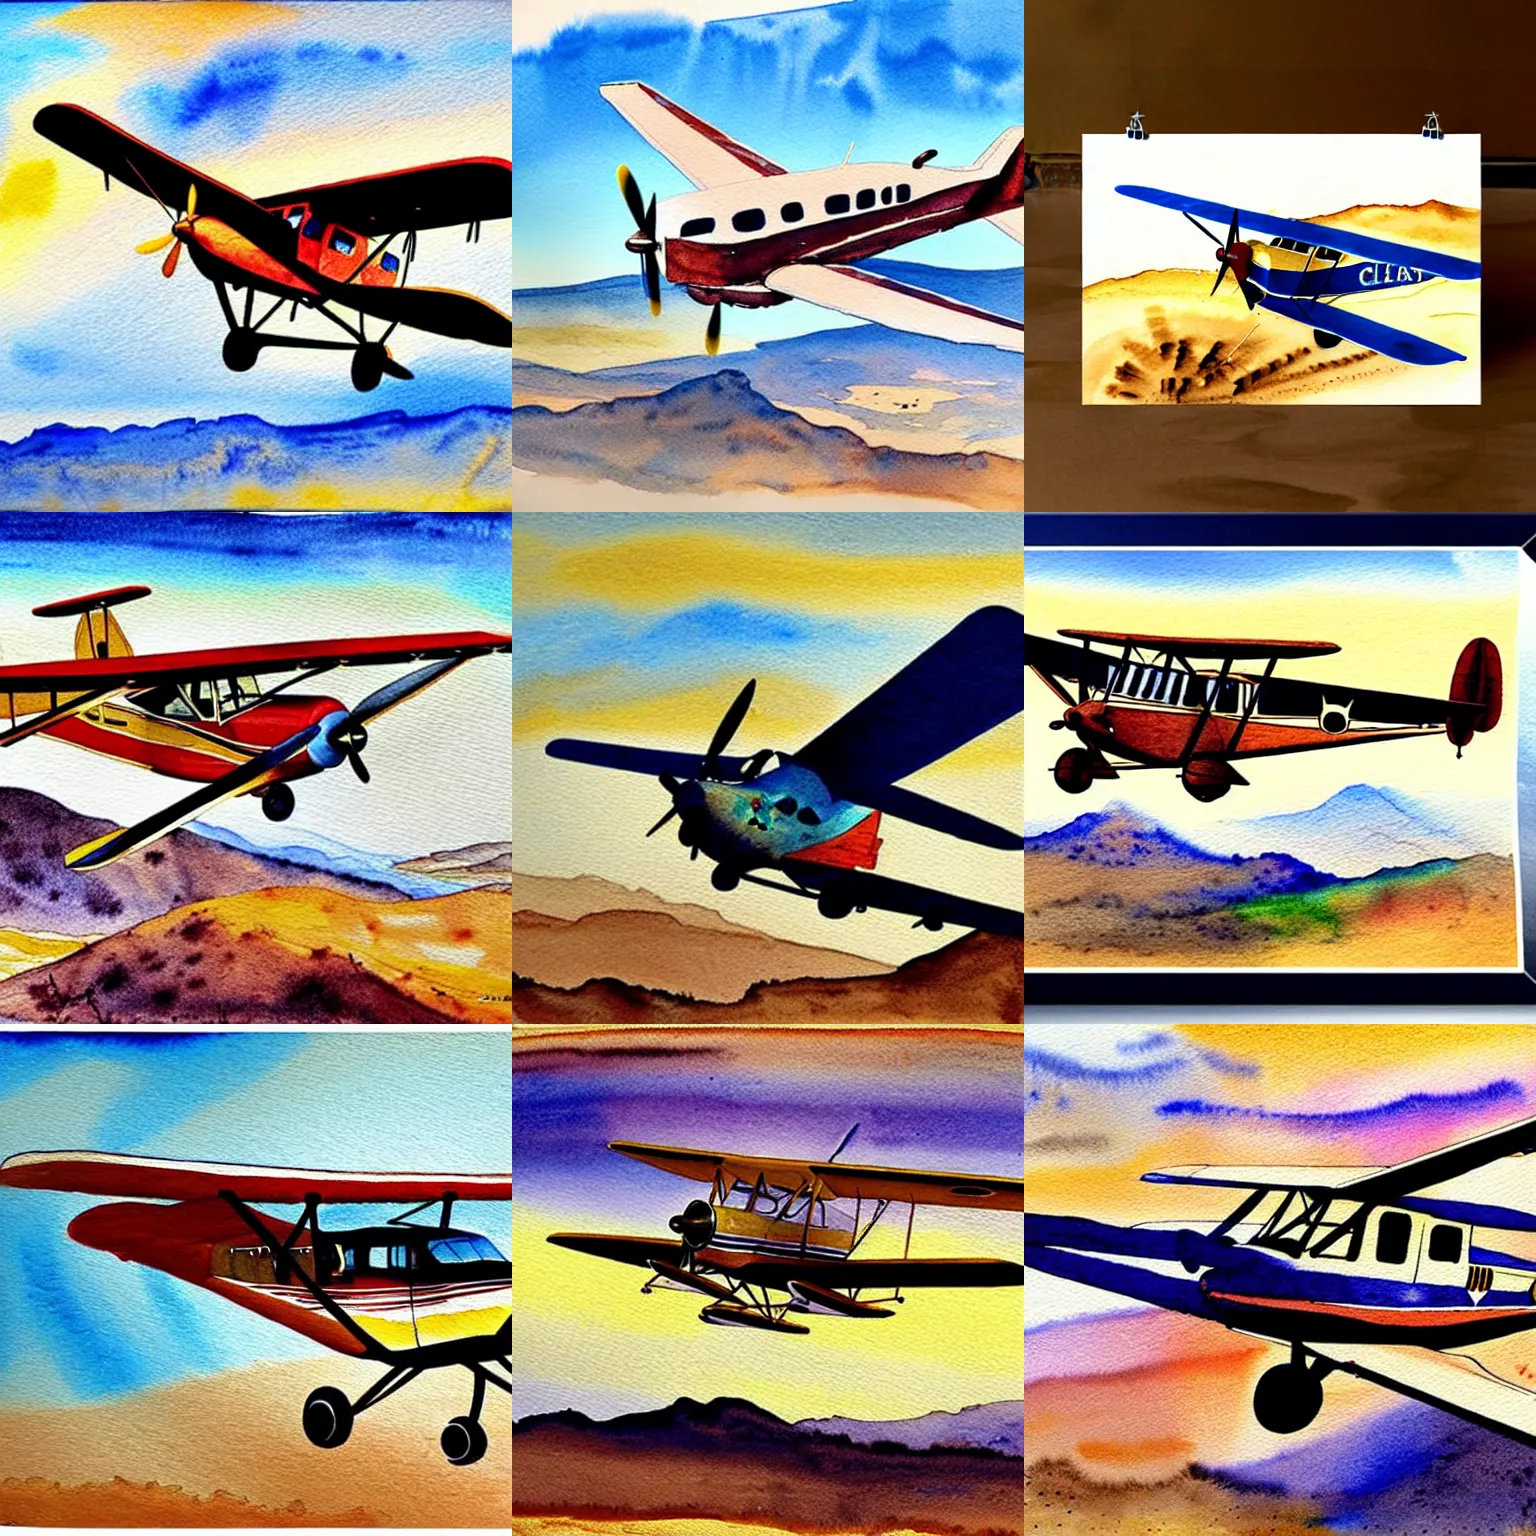 Prompt: a cessna airplane flying over a california desert, a detailed watercolor painting in the style of rembrandt, da vinci. watercolor painting of a cessna plane on poster board